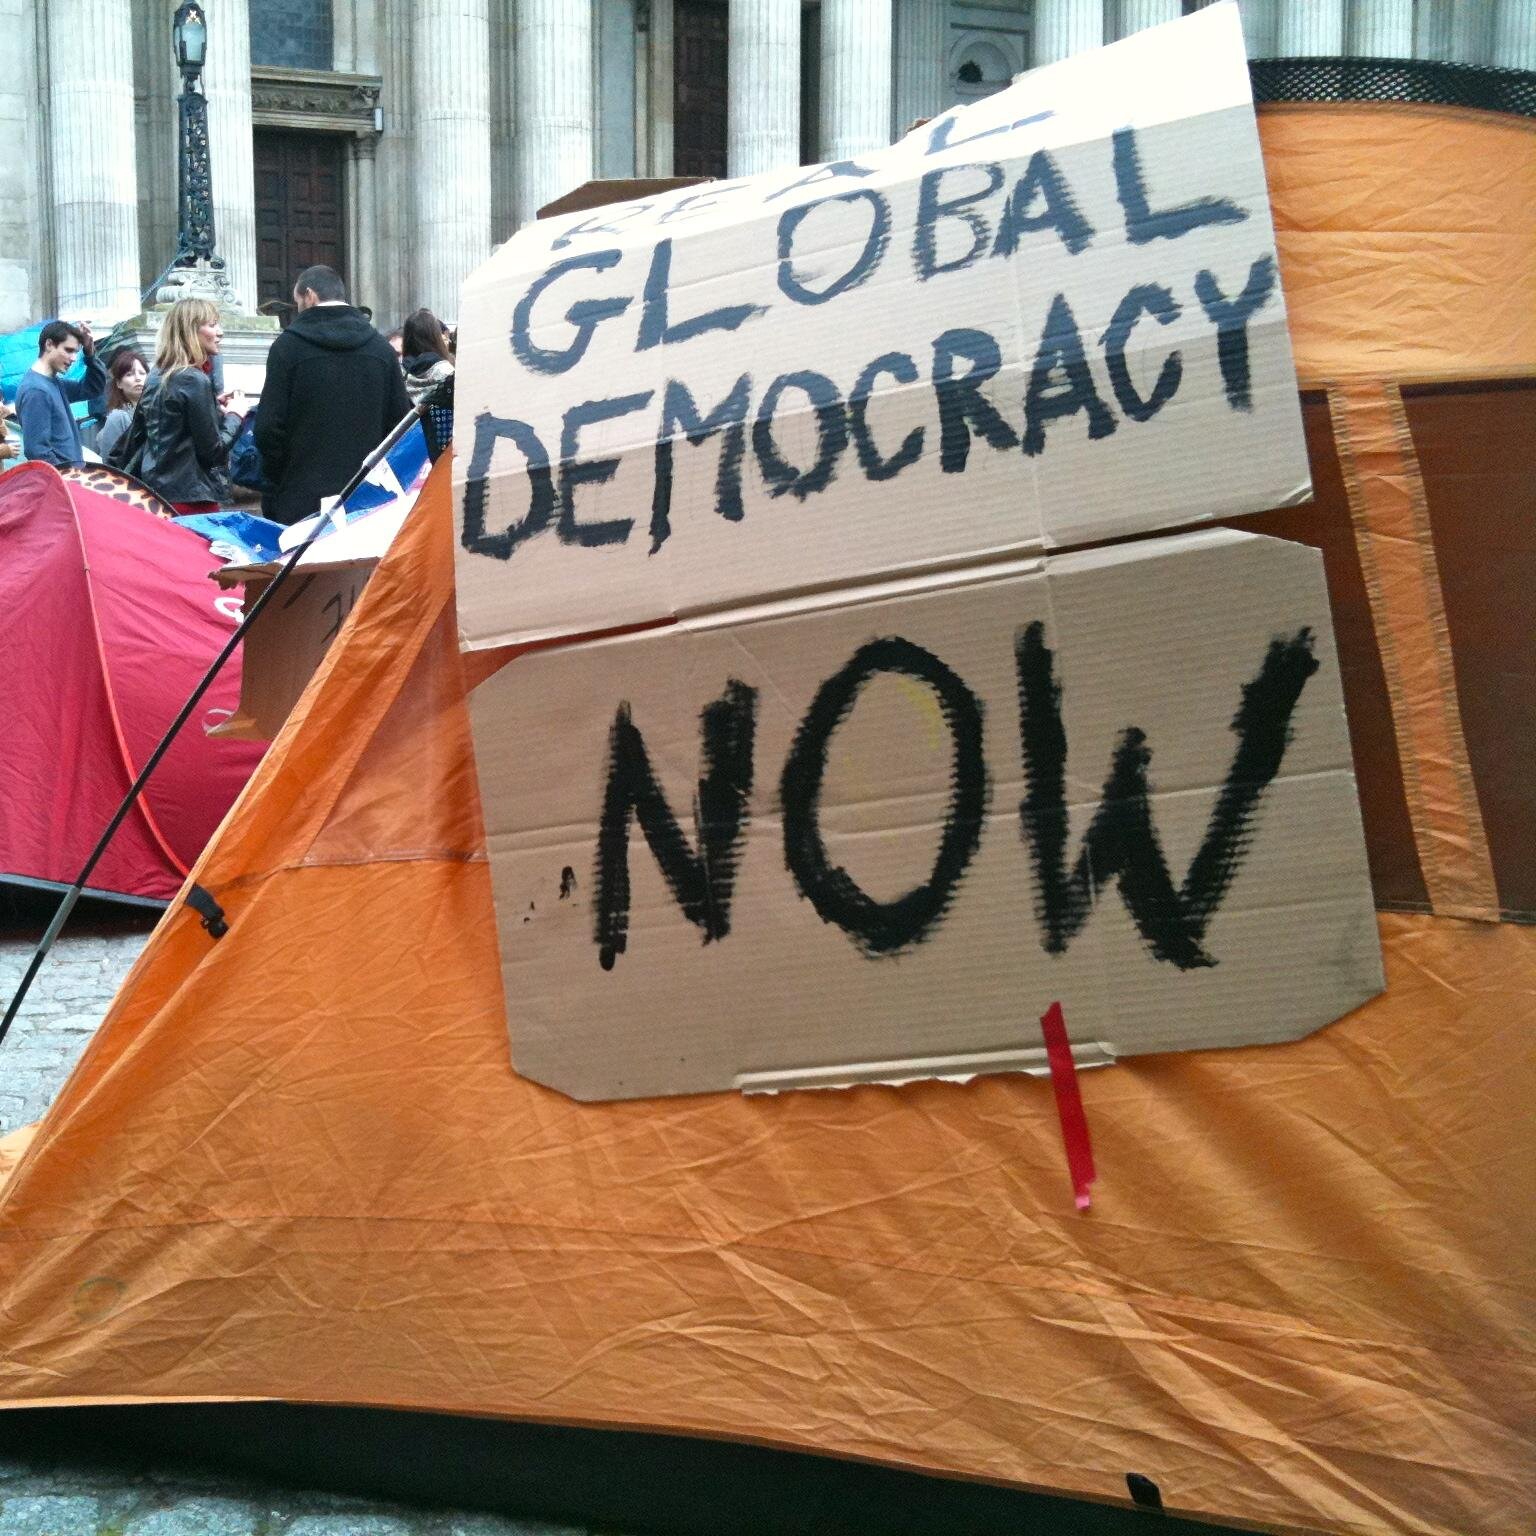 Occupy Democracy is a social movement for democracy free from corporate control that works for people and planet. Our demands: http://t.co/wfEAdWMq1c